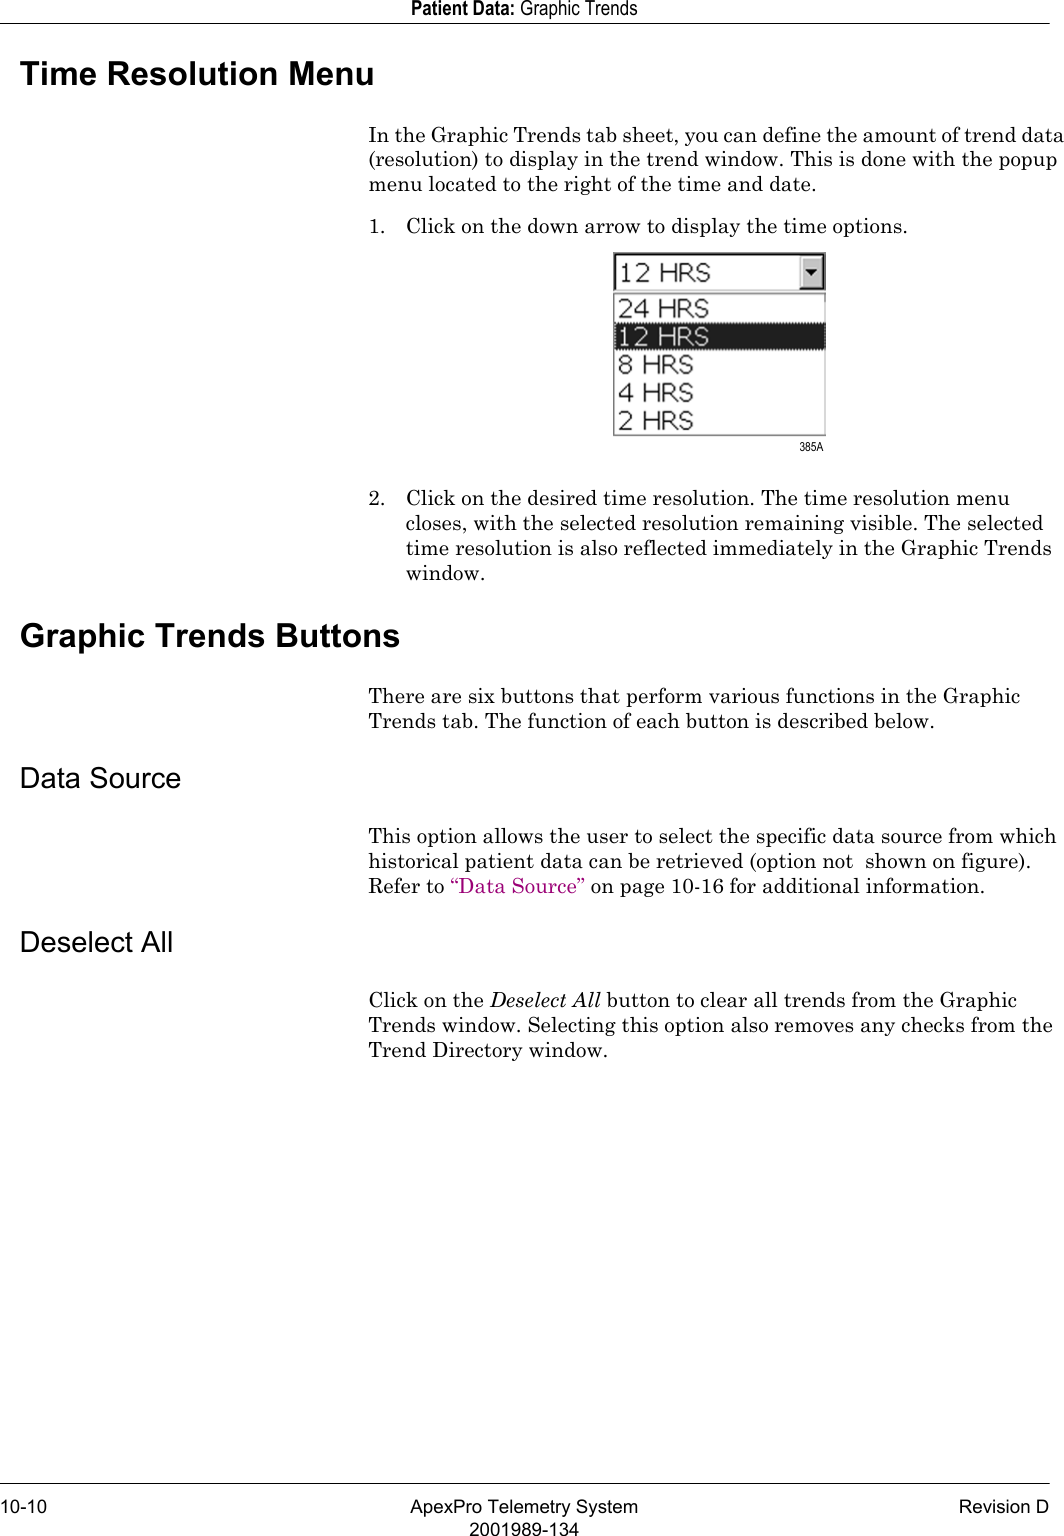 10-10 ApexPro Telemetry System Revision D2001989-134Patient Data: Graphic TrendsTime Resolution MenuIn the Graphic Trends tab sheet, you can define the amount of trend data (resolution) to display in the trend window. This is done with the popup menu located to the right of the time and date.1. Click on the down arrow to display the time options.2. Click on the desired time resolution. The time resolution menu closes, with the selected resolution remaining visible. The selected time resolution is also reflected immediately in the Graphic Trends window.Graphic Trends ButtonsThere are six buttons that perform various functions in the Graphic Trends tab. The function of each button is described below.Data SourceThis option allows the user to select the specific data source from which historical patient data can be retrieved (option not  shown on figure). Refer to “Data Source” on page 10-16 for additional information.Deselect AllClick on the Deselect All button to clear all trends from the Graphic Trends window. Selecting this option also removes any checks from the Trend Directory window. 385A